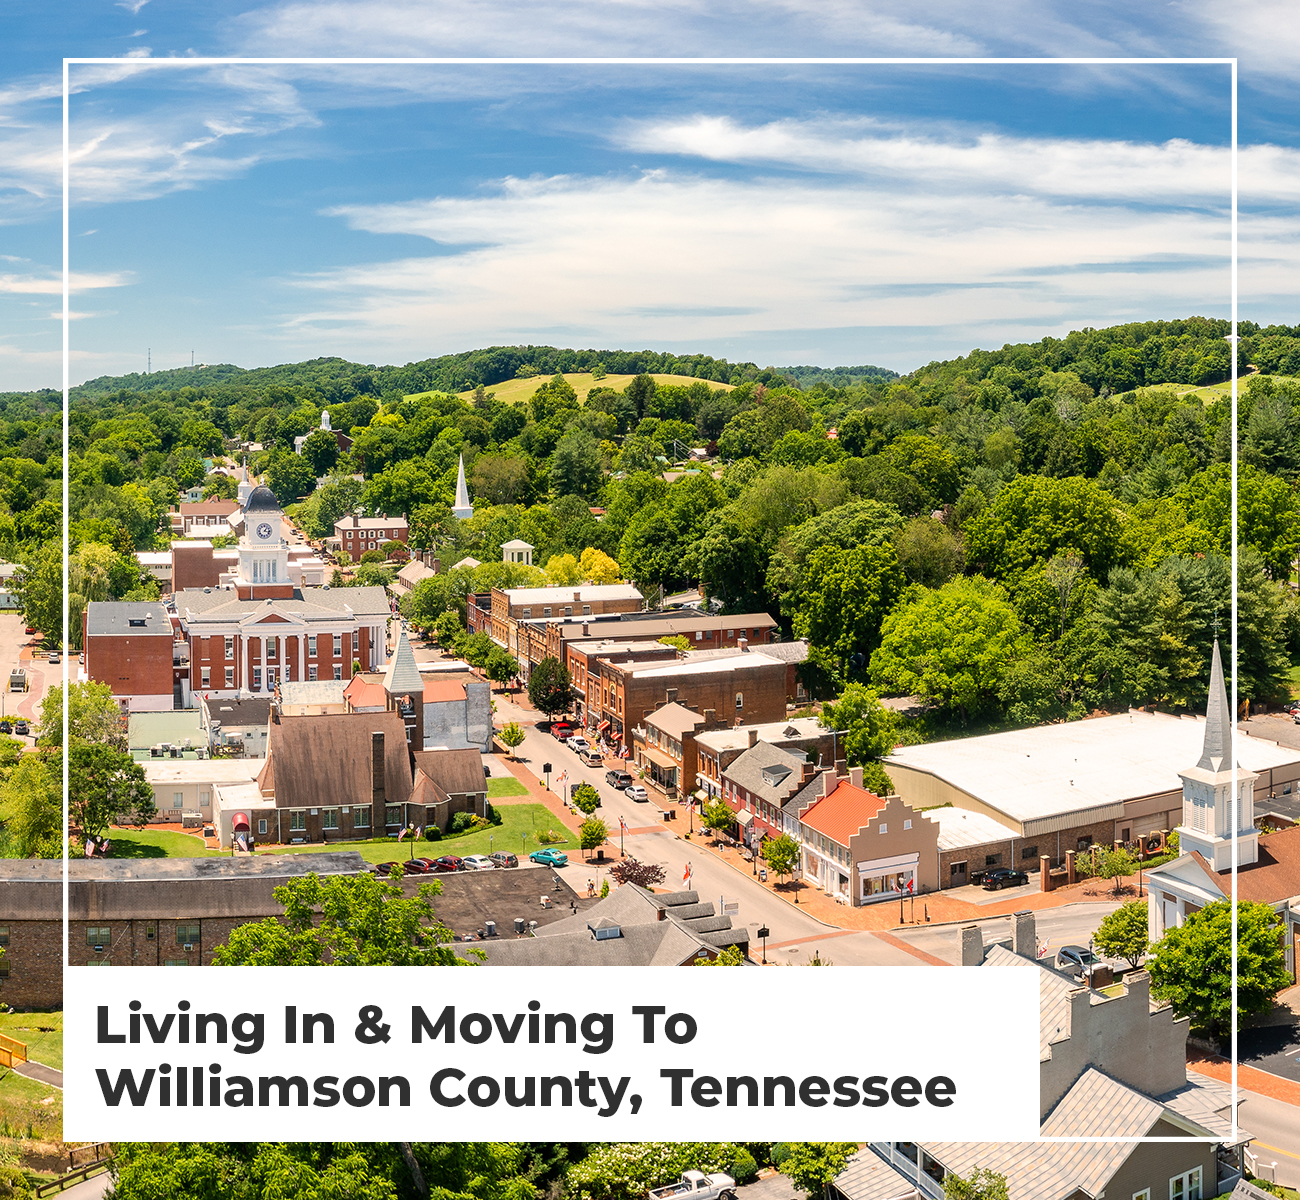 Moving To And Living In Williamson County, Tennessee - Main Image